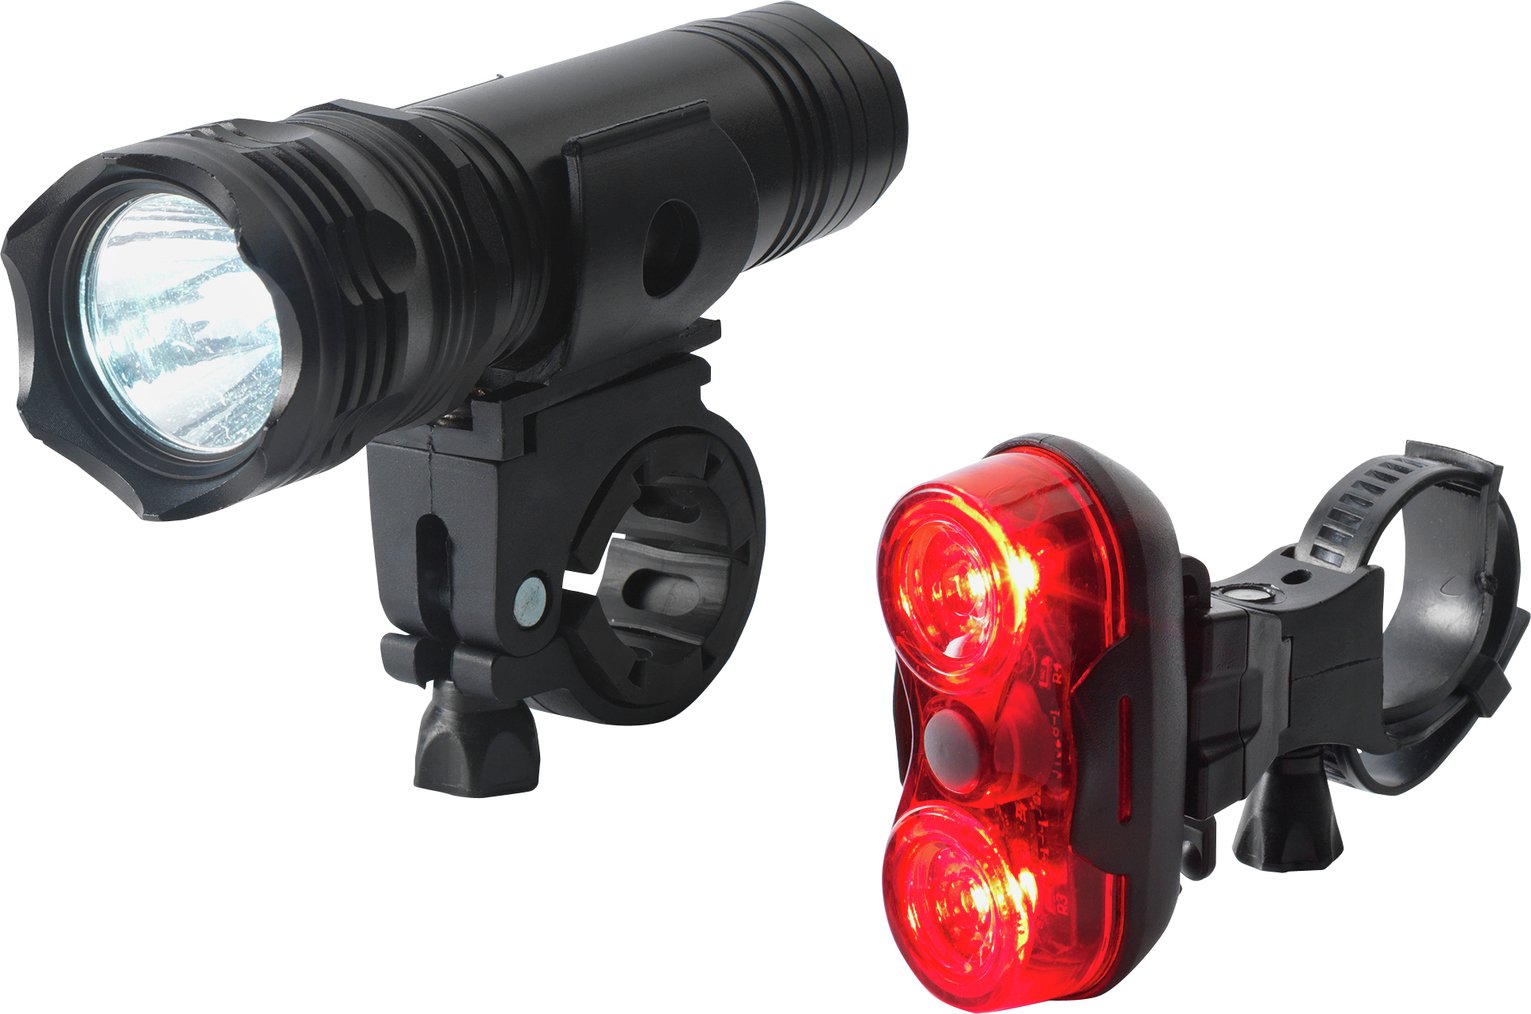 Rolson High Powered Front and Rear LED Bike Light Set